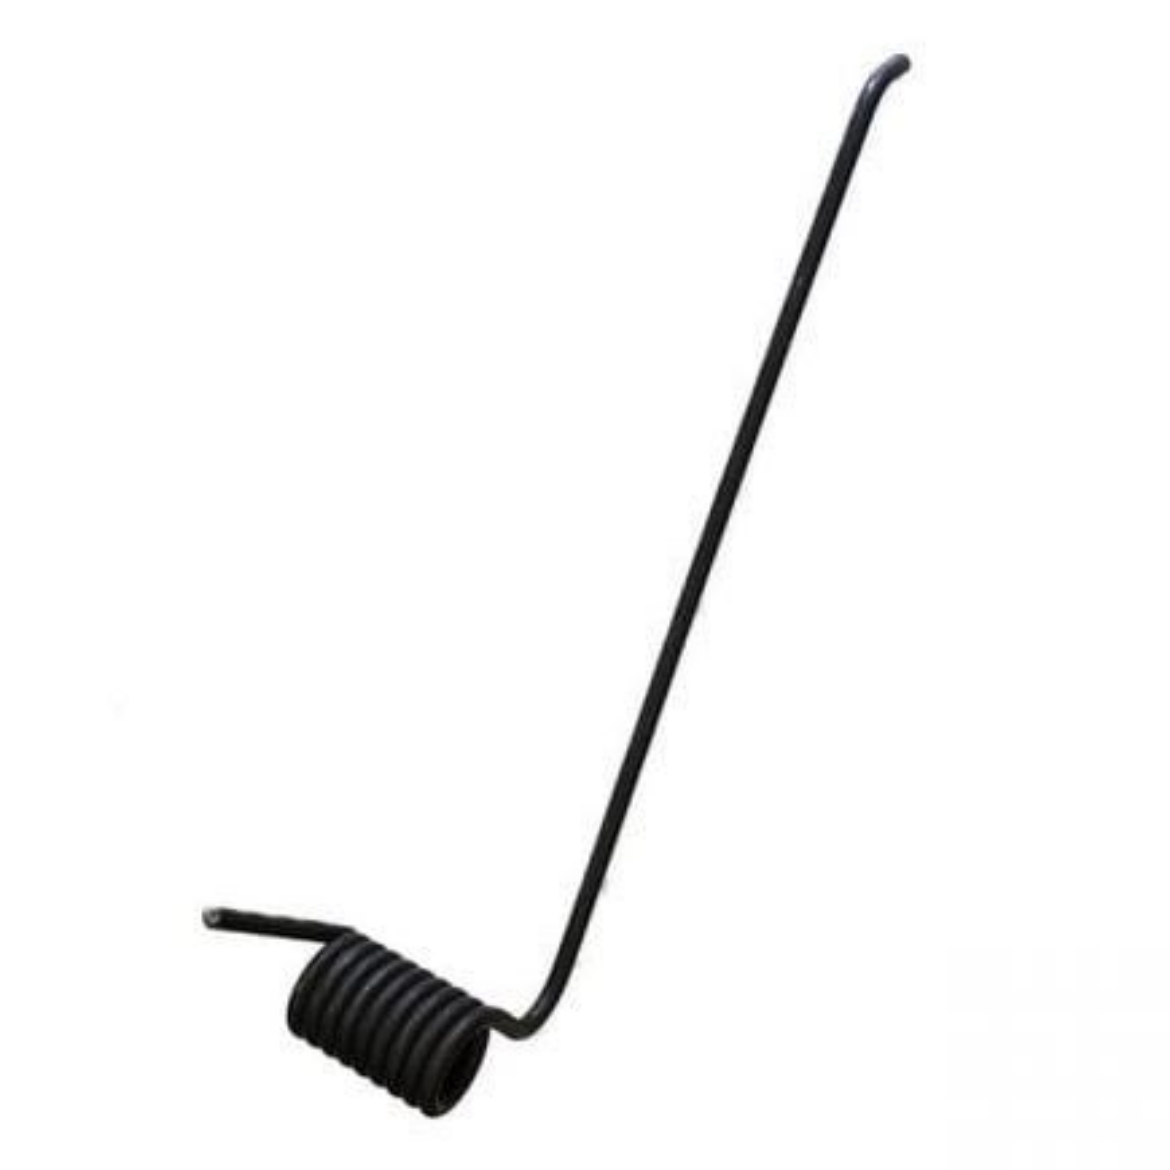 Picture of 19mm Horse Float Tailgate Spring  (Left)  100KG Lift - Long Arm on Left, Small Arm on Right going away from the body